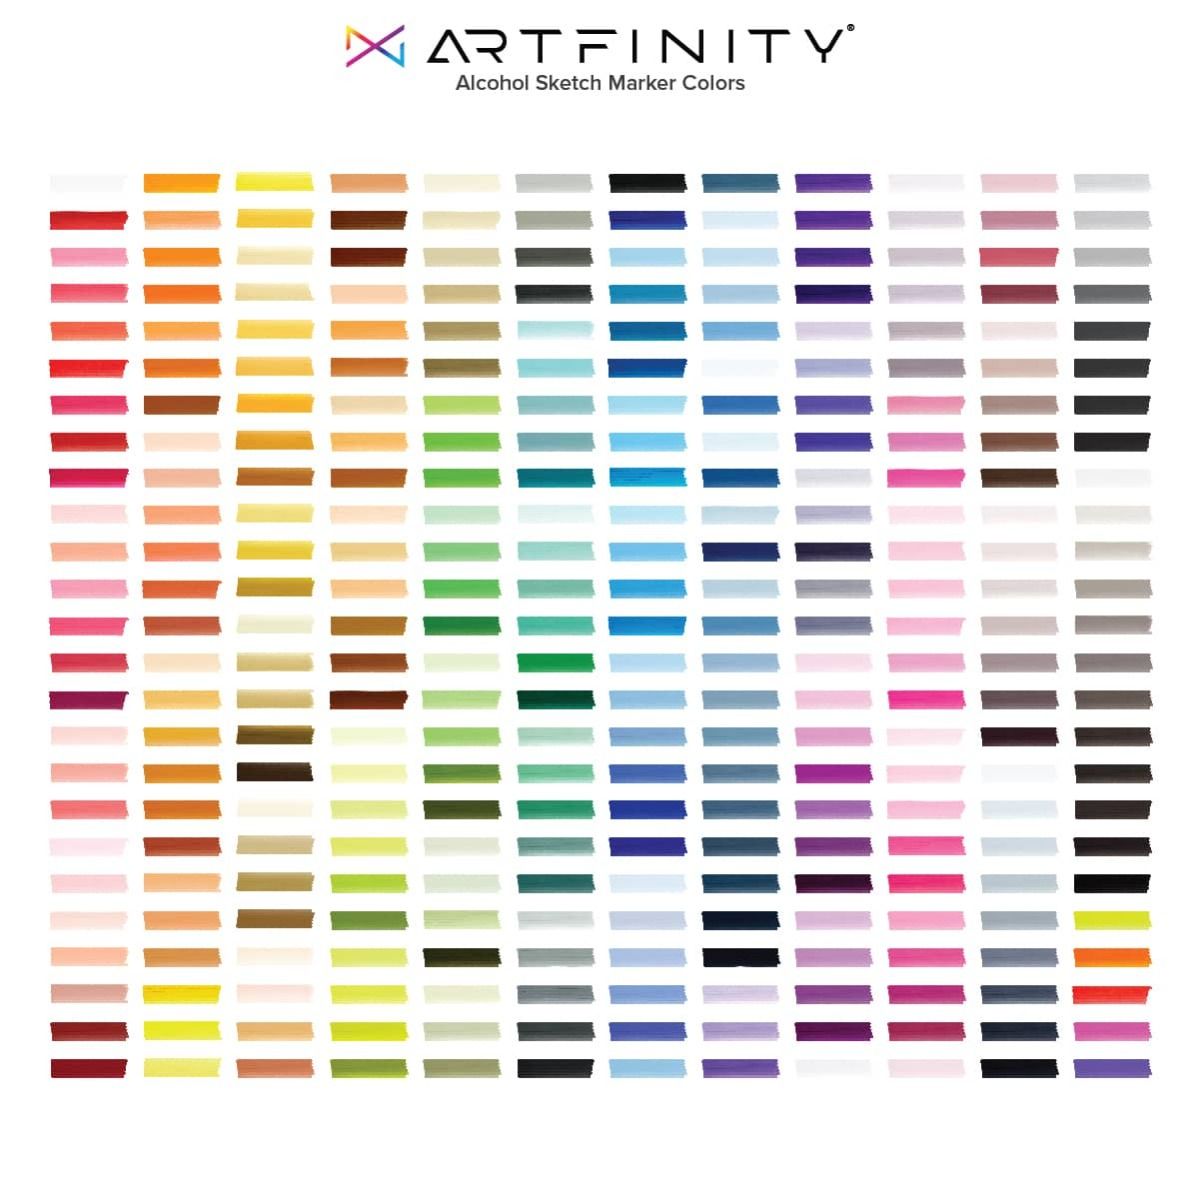 Artfinity Sketch Marker Sets - Vibrant, Professional, Dye-Based Alcohol  Markers for Artists, Drawing, Students, Travel, & More! - [Flagstone Red  RV6-4 - Set of 3] 